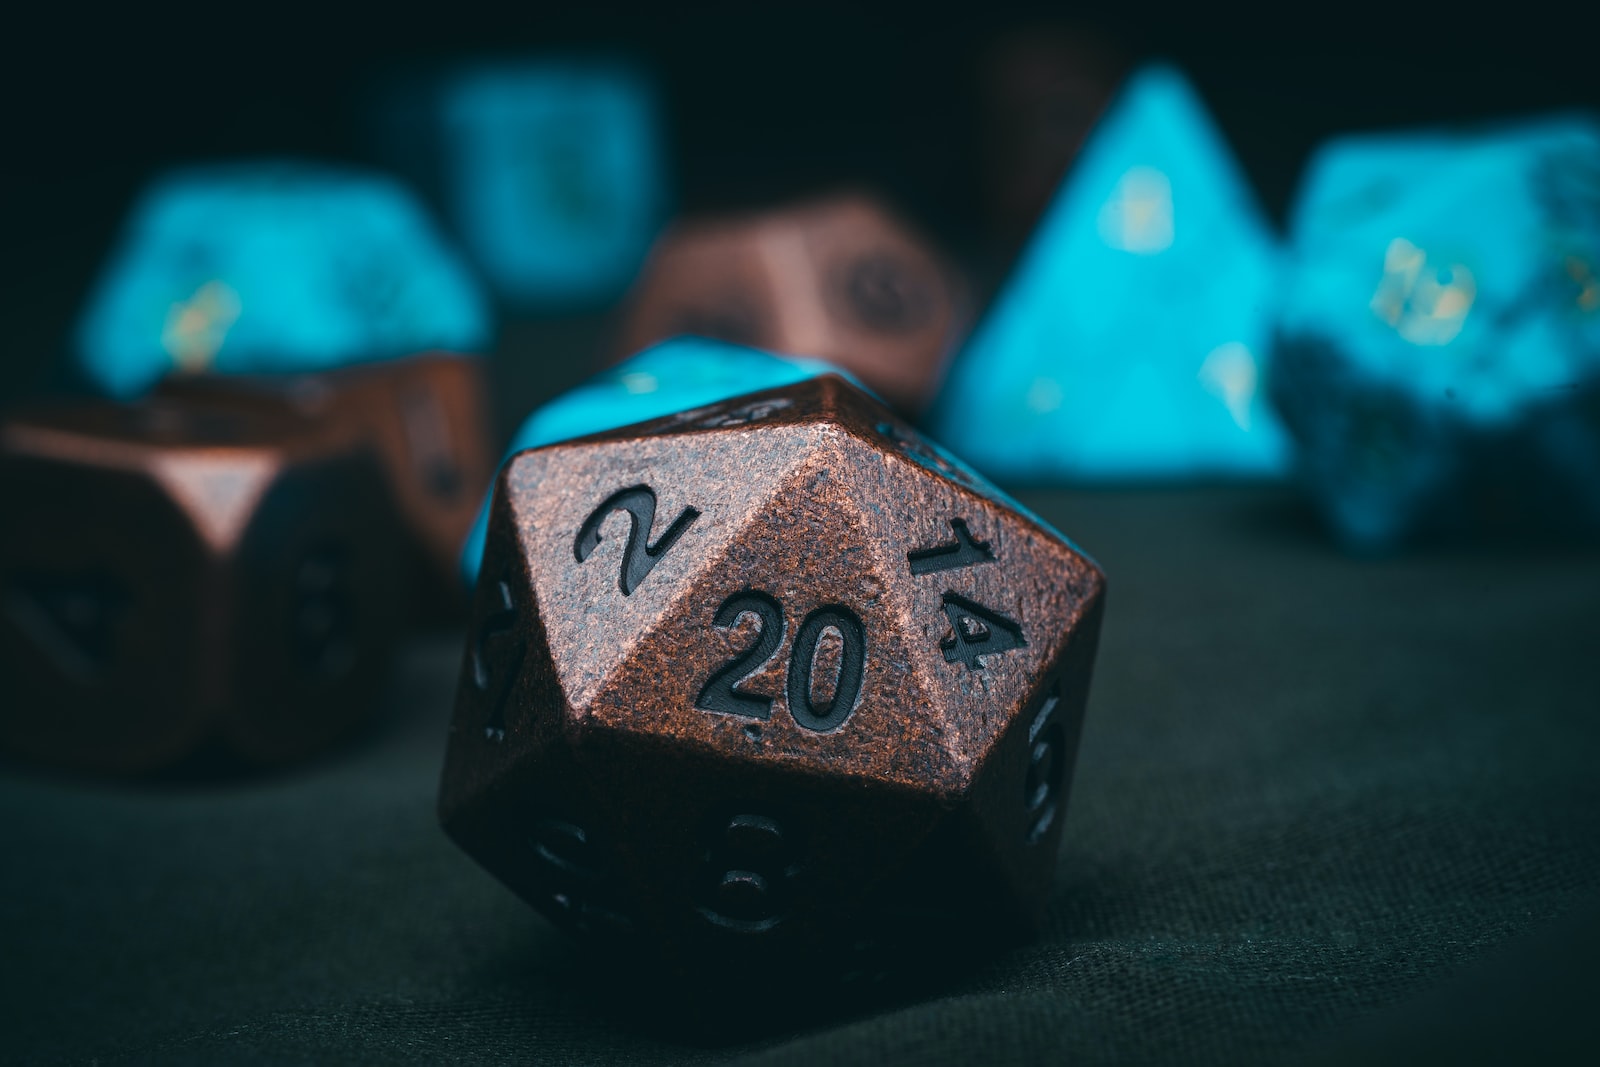 How Long Does It Take To Play a Game of Dungeons & Dragons?